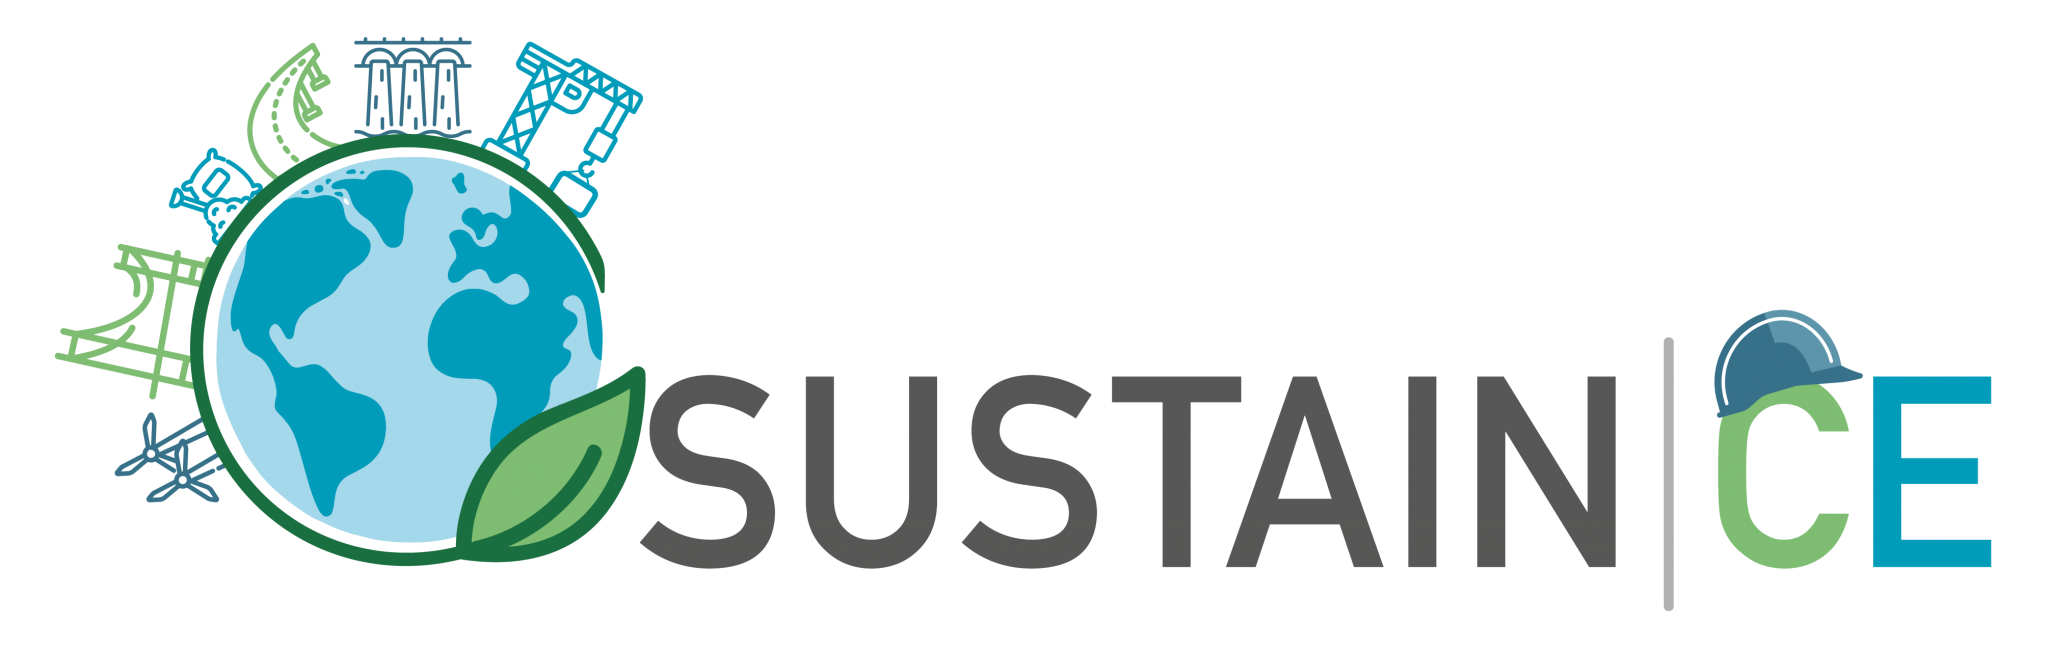 SUSTAIN-CE project: The Virtual Learning Environment has been launched.